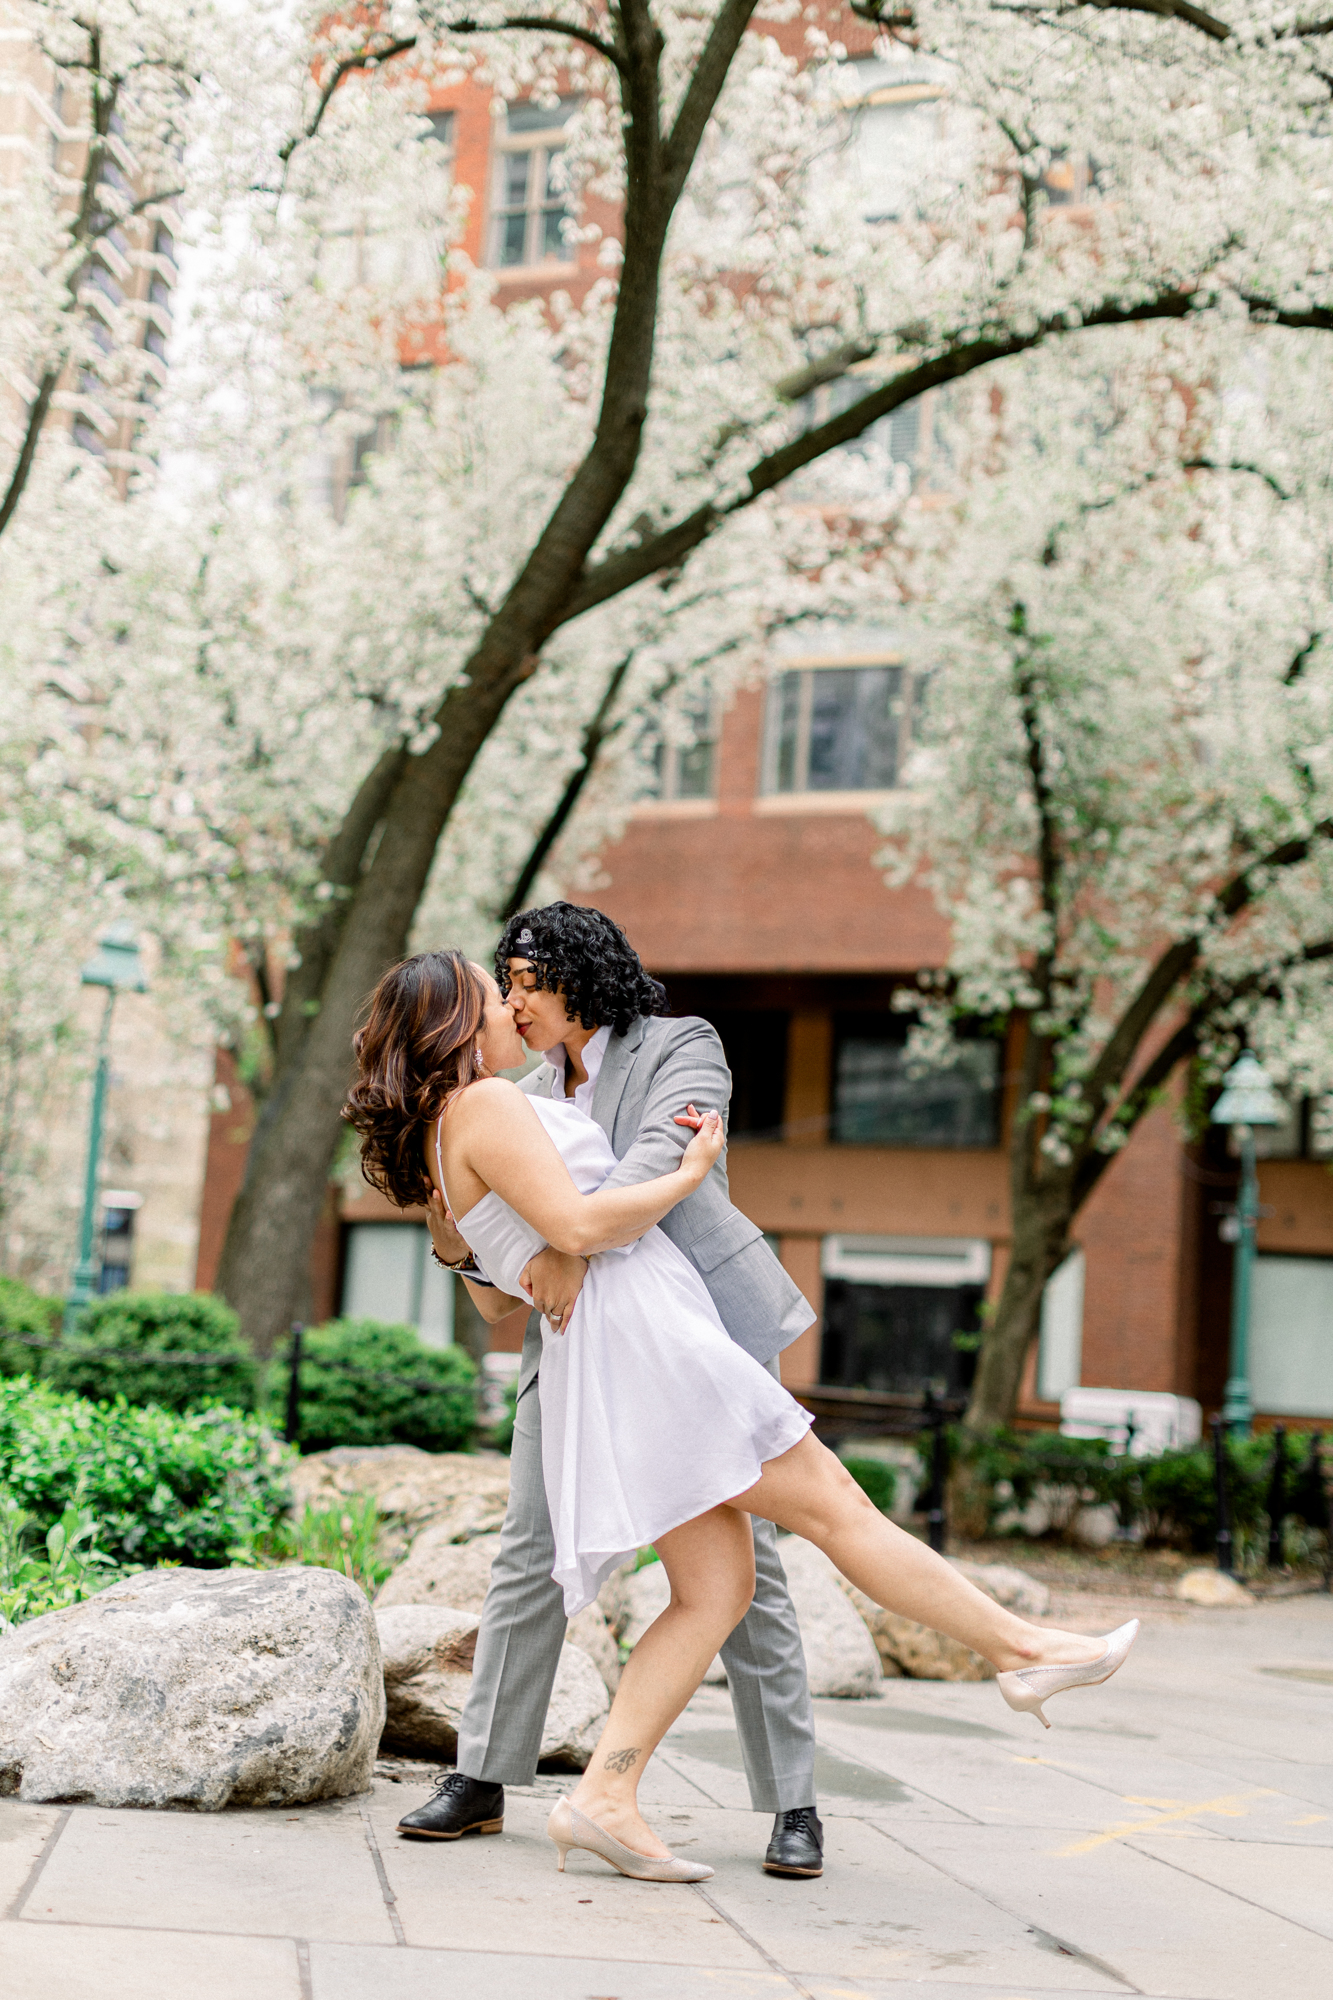 Dreamy South Street Seaport Engagement Photography